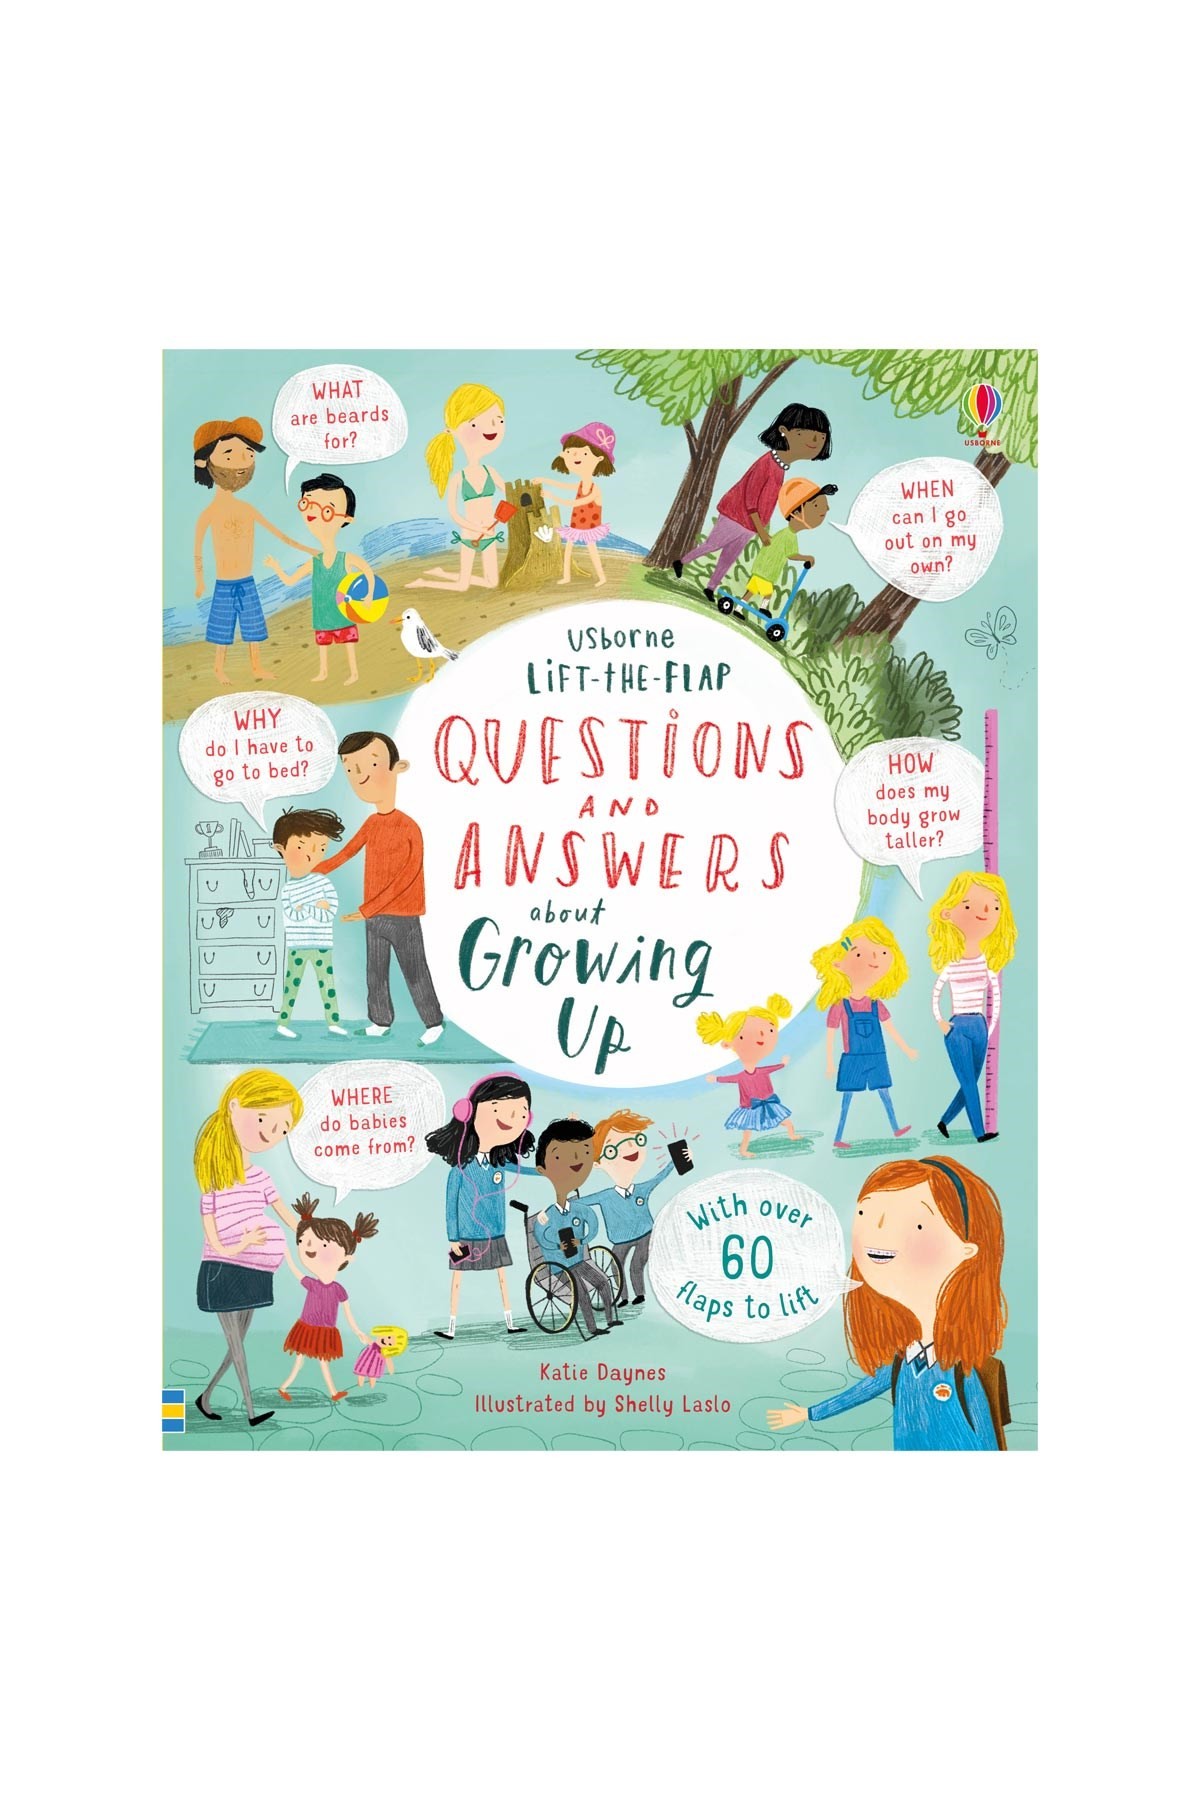 The Usborne Lift-The-Flap Questions & Answers About Growing Up